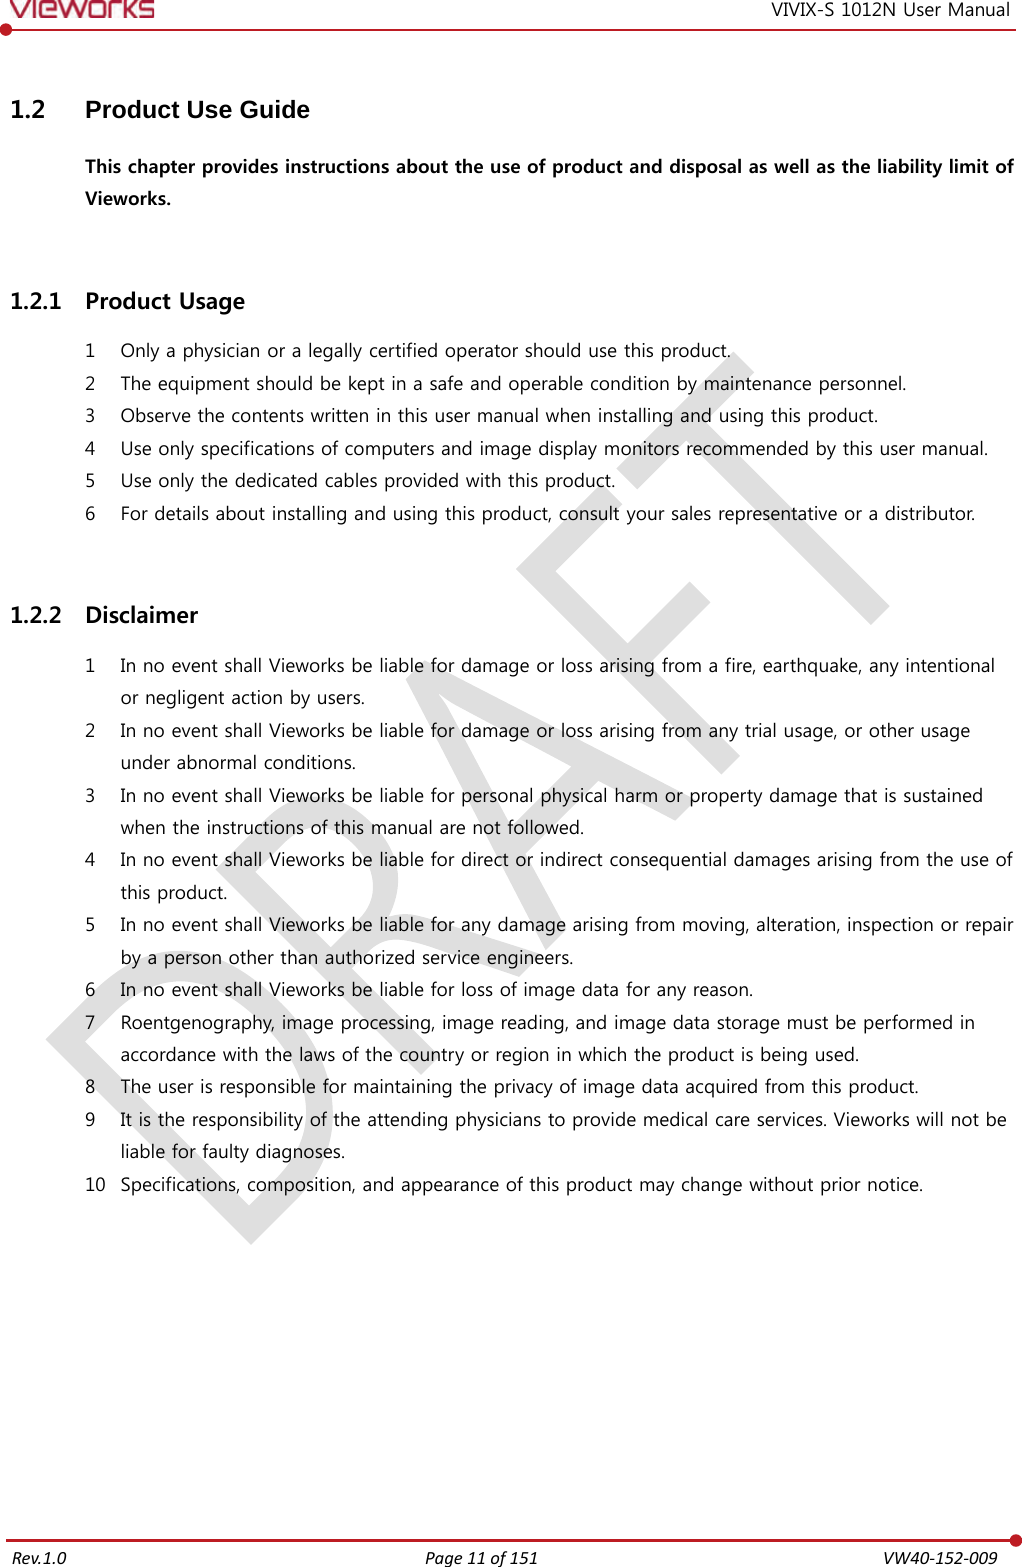   Rev.1.0 Page 11 of 151  VW40-152-009 VIVIX-S 1012N User Manual 1.2 Product Use Guide This chapter provides instructions about the use of product and disposal as well as the liability limit of Vieworks.  1.2.1 Product Usage 1 Only a physician or a legally certified operator should use this product. 2 The equipment should be kept in a safe and operable condition by maintenance personnel. 3 Observe the contents written in this user manual when installing and using this product. 4 Use only specifications of computers and image display monitors recommended by this user manual. 5 Use only the dedicated cables provided with this product. 6 For details about installing and using this product, consult your sales representative or a distributor.  1.2.2 Disclaimer 1 In no event shall Vieworks be liable for damage or loss arising from a fire, earthquake, any intentional or negligent action by users. 2 In no event shall Vieworks be liable for damage or loss arising from any trial usage, or other usage under abnormal conditions. 3 In no event shall Vieworks be liable for personal physical harm or property damage that is sustained when the instructions of this manual are not followed. 4 In no event shall Vieworks be liable for direct or indirect consequential damages arising from the use of this product. 5 In no event shall Vieworks be liable for any damage arising from moving, alteration, inspection or repair by a person other than authorized service engineers. 6 In no event shall Vieworks be liable for loss of image data for any reason. 7 Roentgenography, image processing, image reading, and image data storage must be performed in accordance with the laws of the country or region in which the product is being used. 8 The user is responsible for maintaining the privacy of image data acquired from this product. 9 It is the responsibility of the attending physicians to provide medical care services. Vieworks will not be liable for faulty diagnoses. 10 Specifications, composition, and appearance of this product may change without prior notice.         